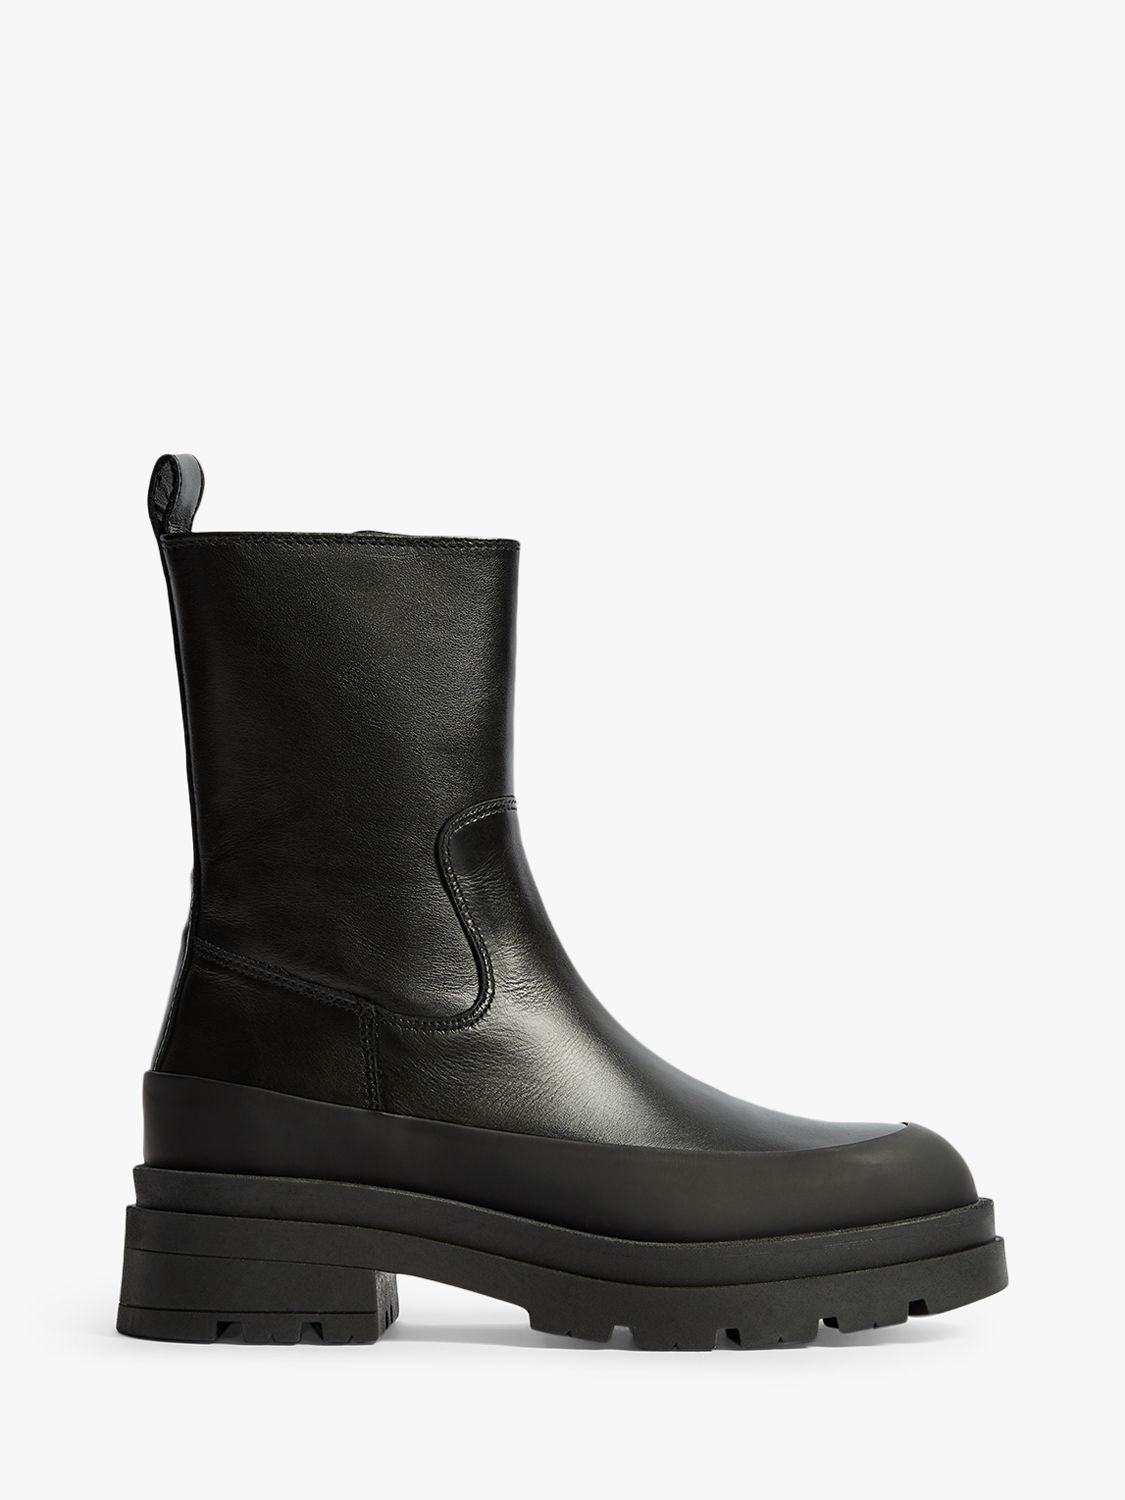 Reiss Ave Leather Stomper Boots, Black at John Lewis & Partners